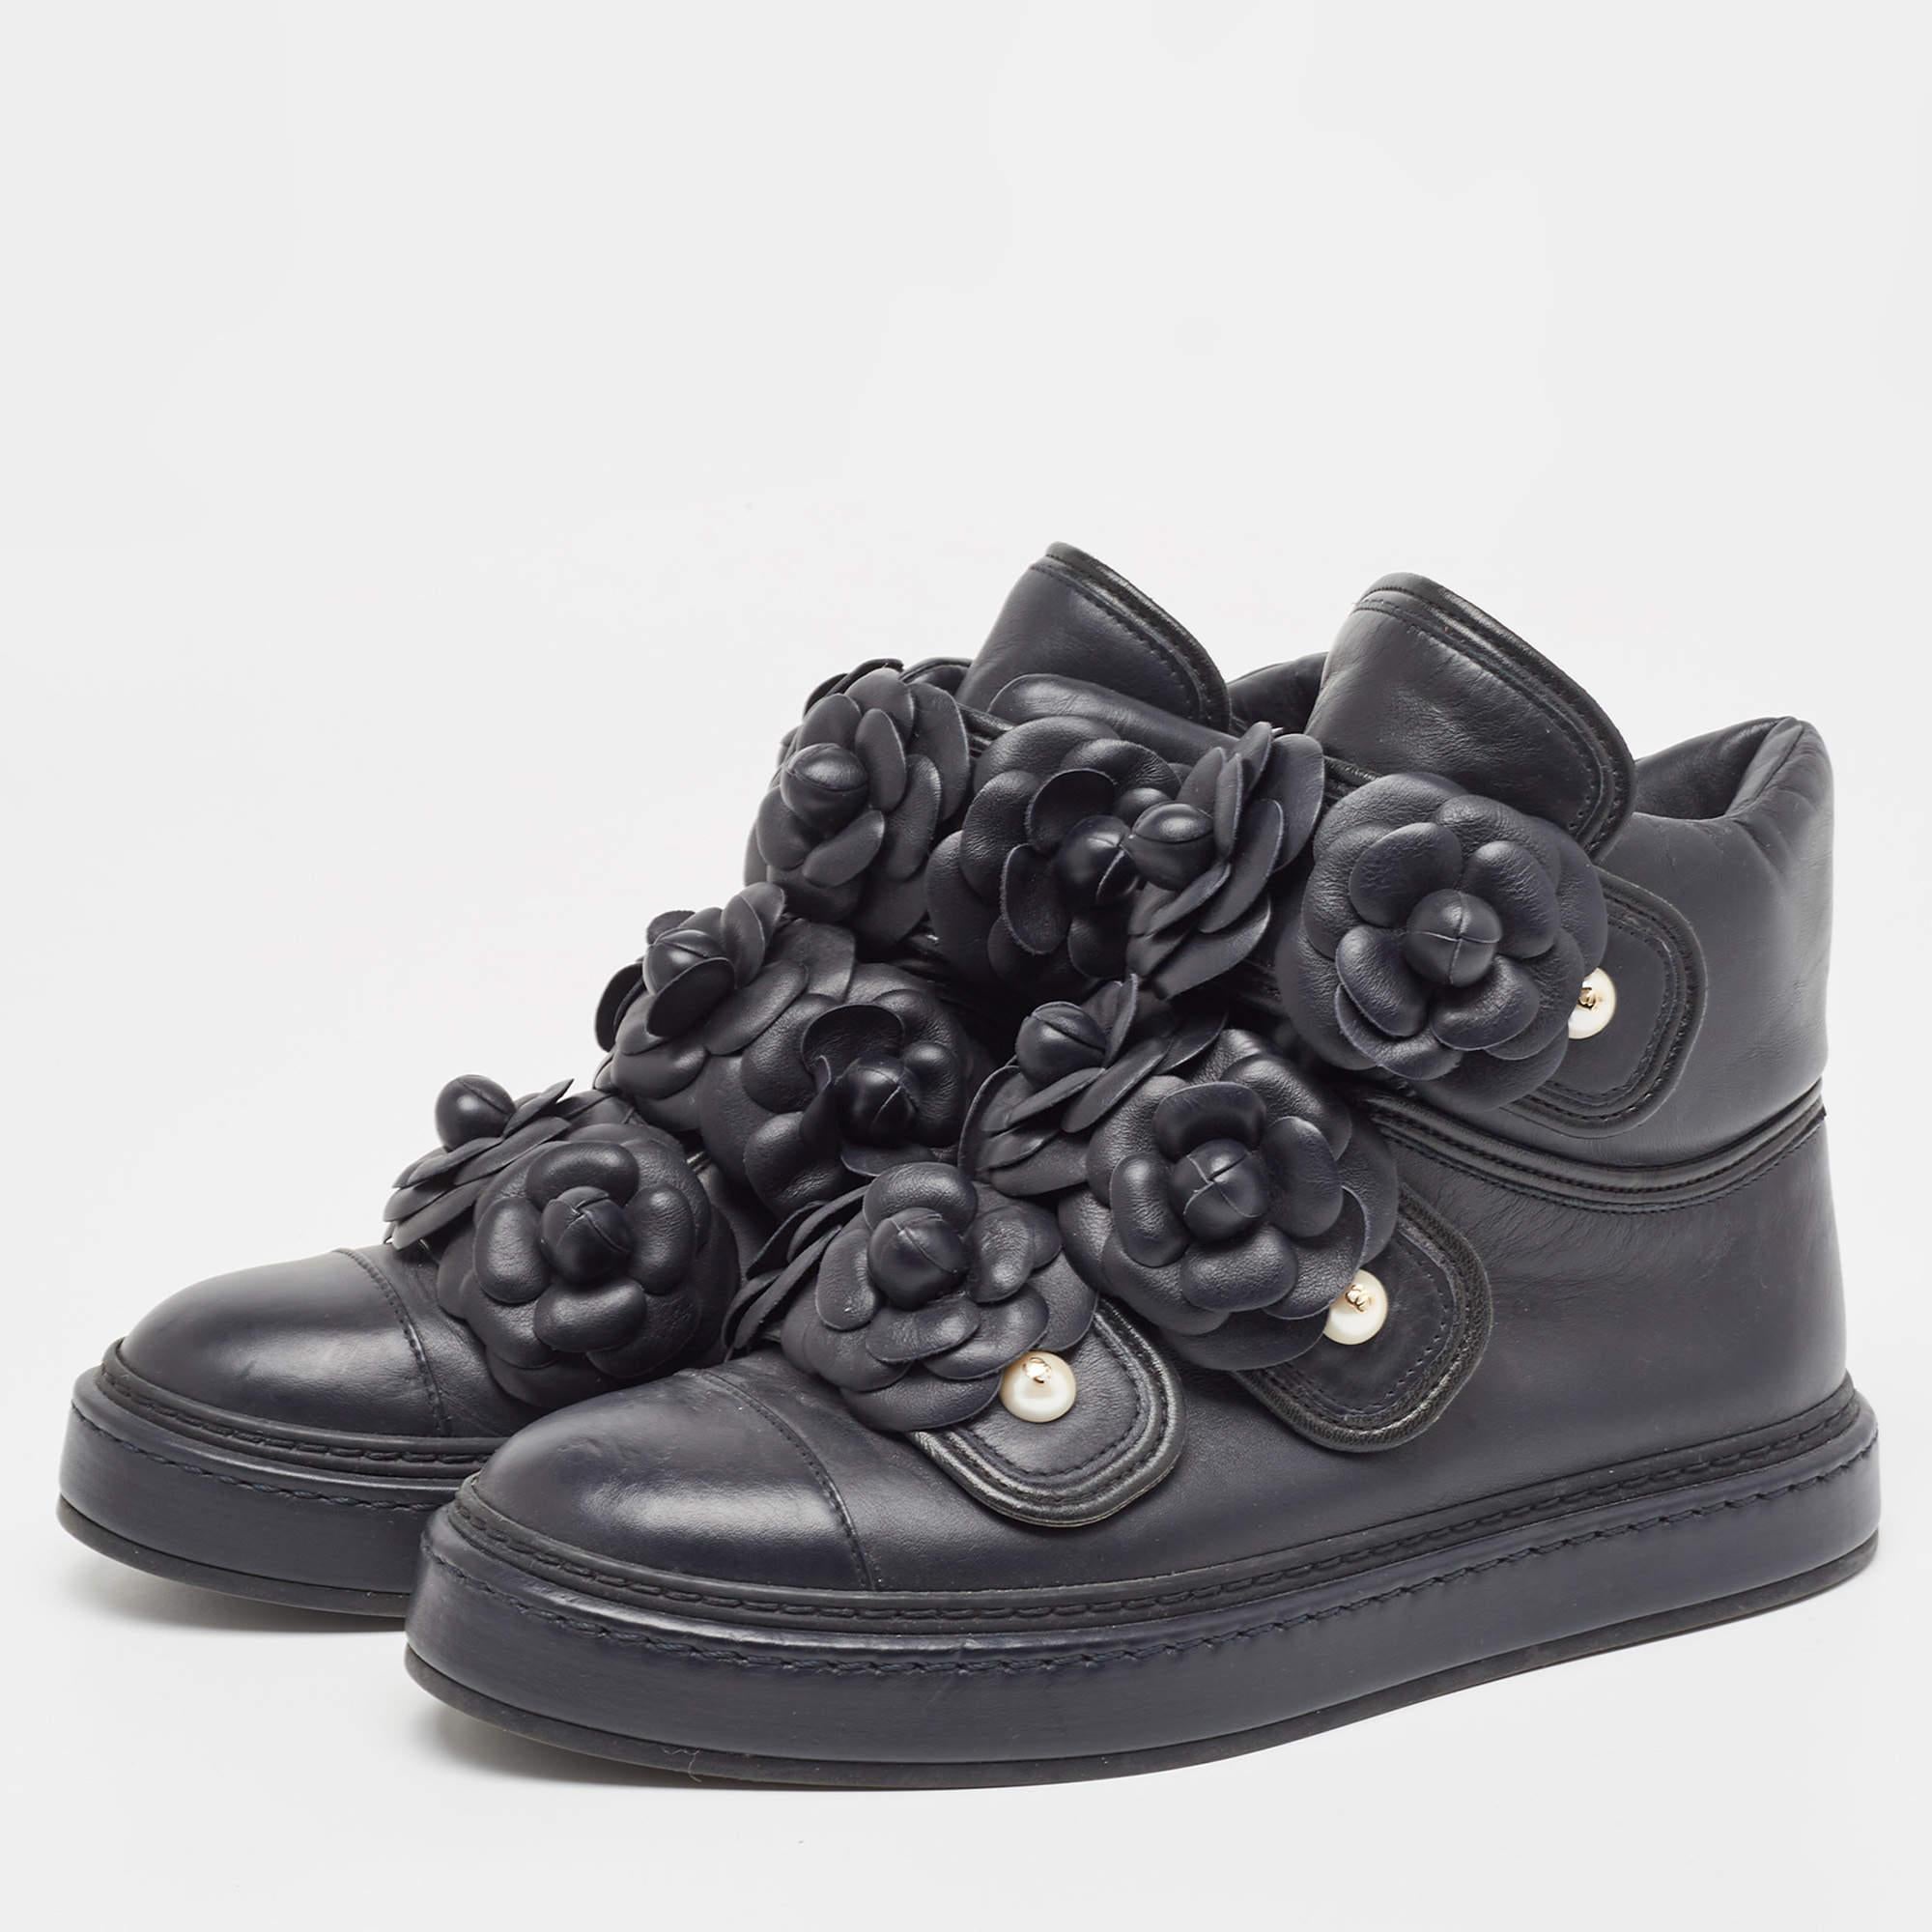 Chanel Black Leather Camellia Flowers Embellished High Top Sneakers Size 36.5 In Good Condition For Sale In Dubai, Al Qouz 2